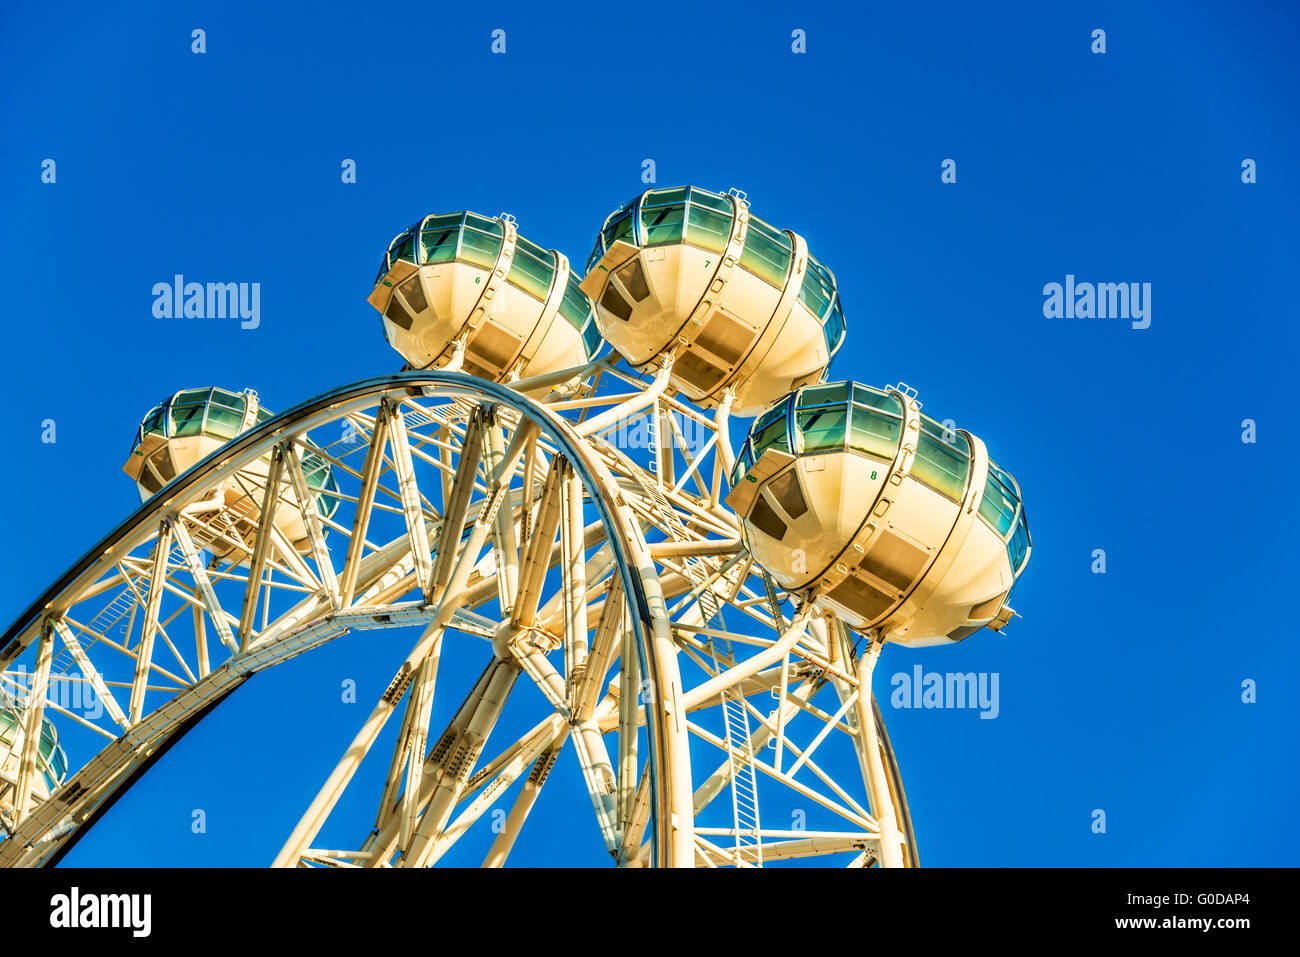 Close up image of the Melbourne Star amusement attraction in Melbourne Australia Stock Photo